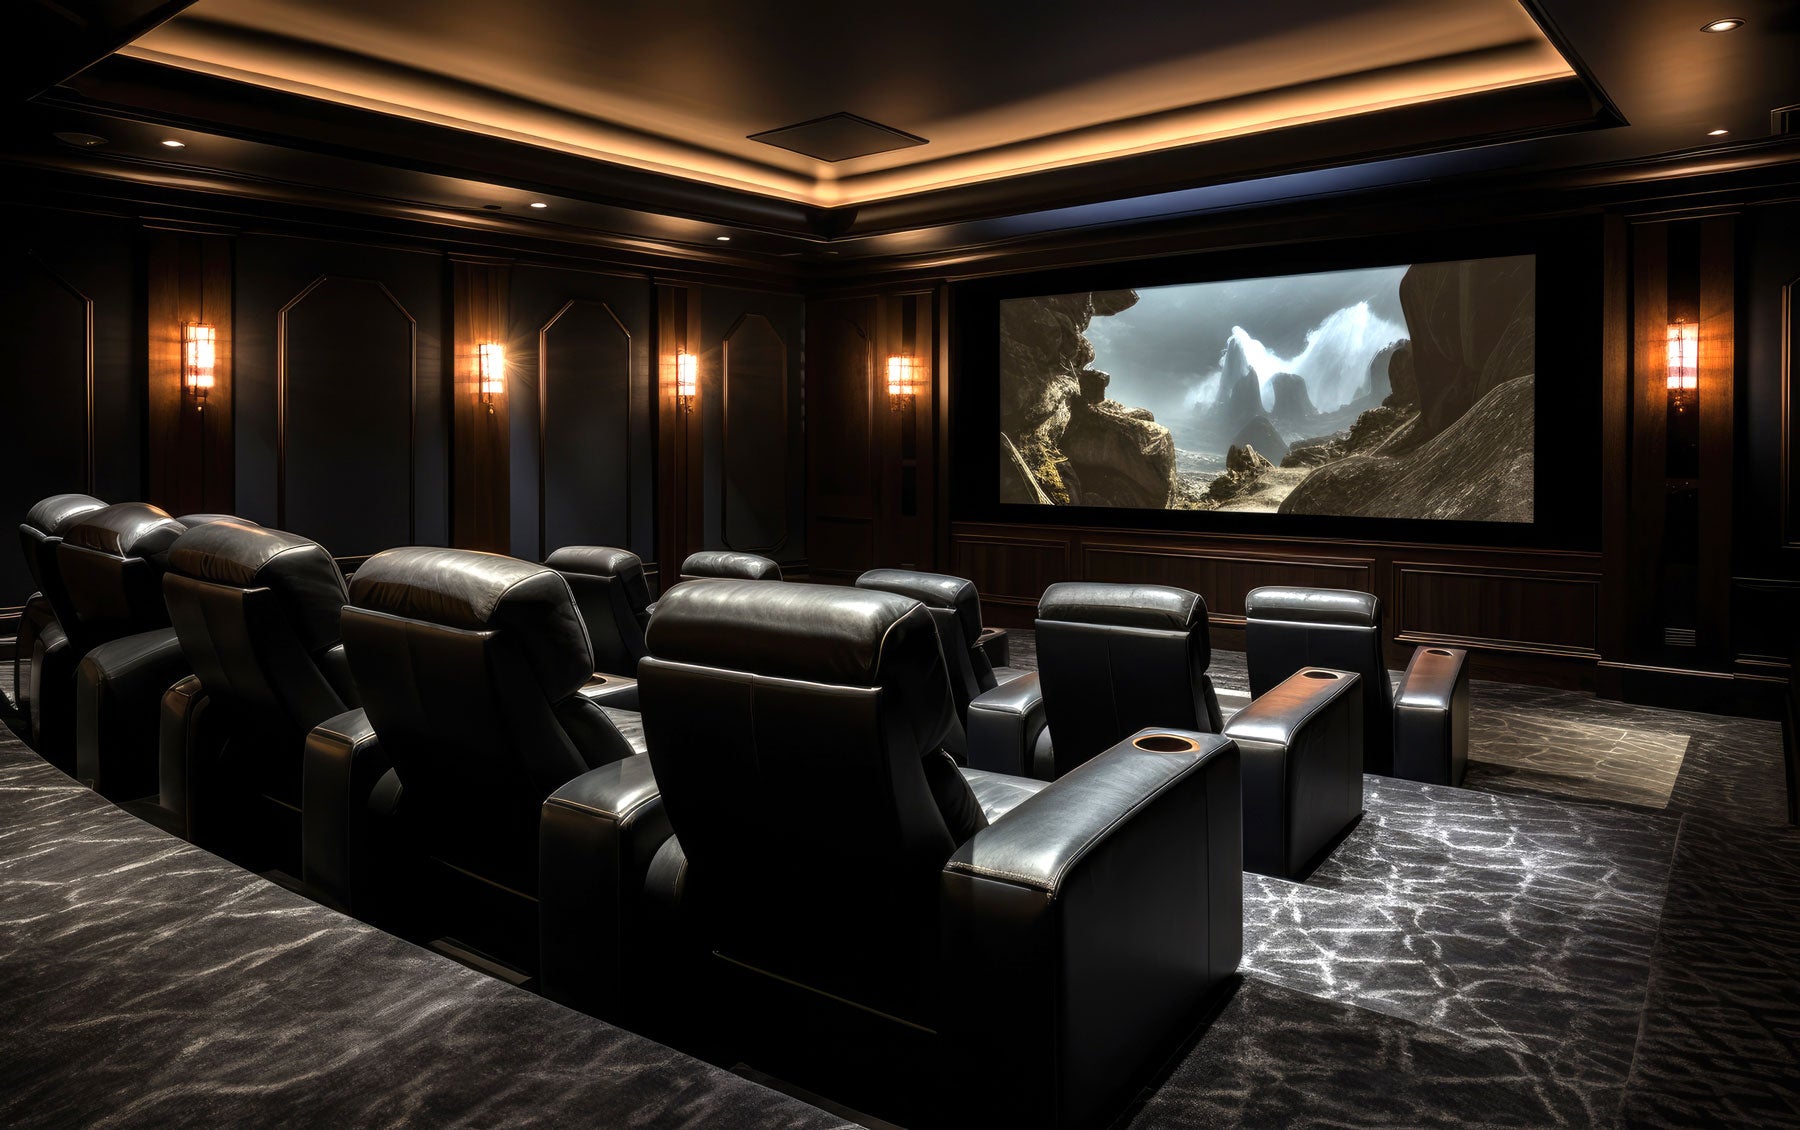 Home Theater Resource-Shop online for all your home theater needs